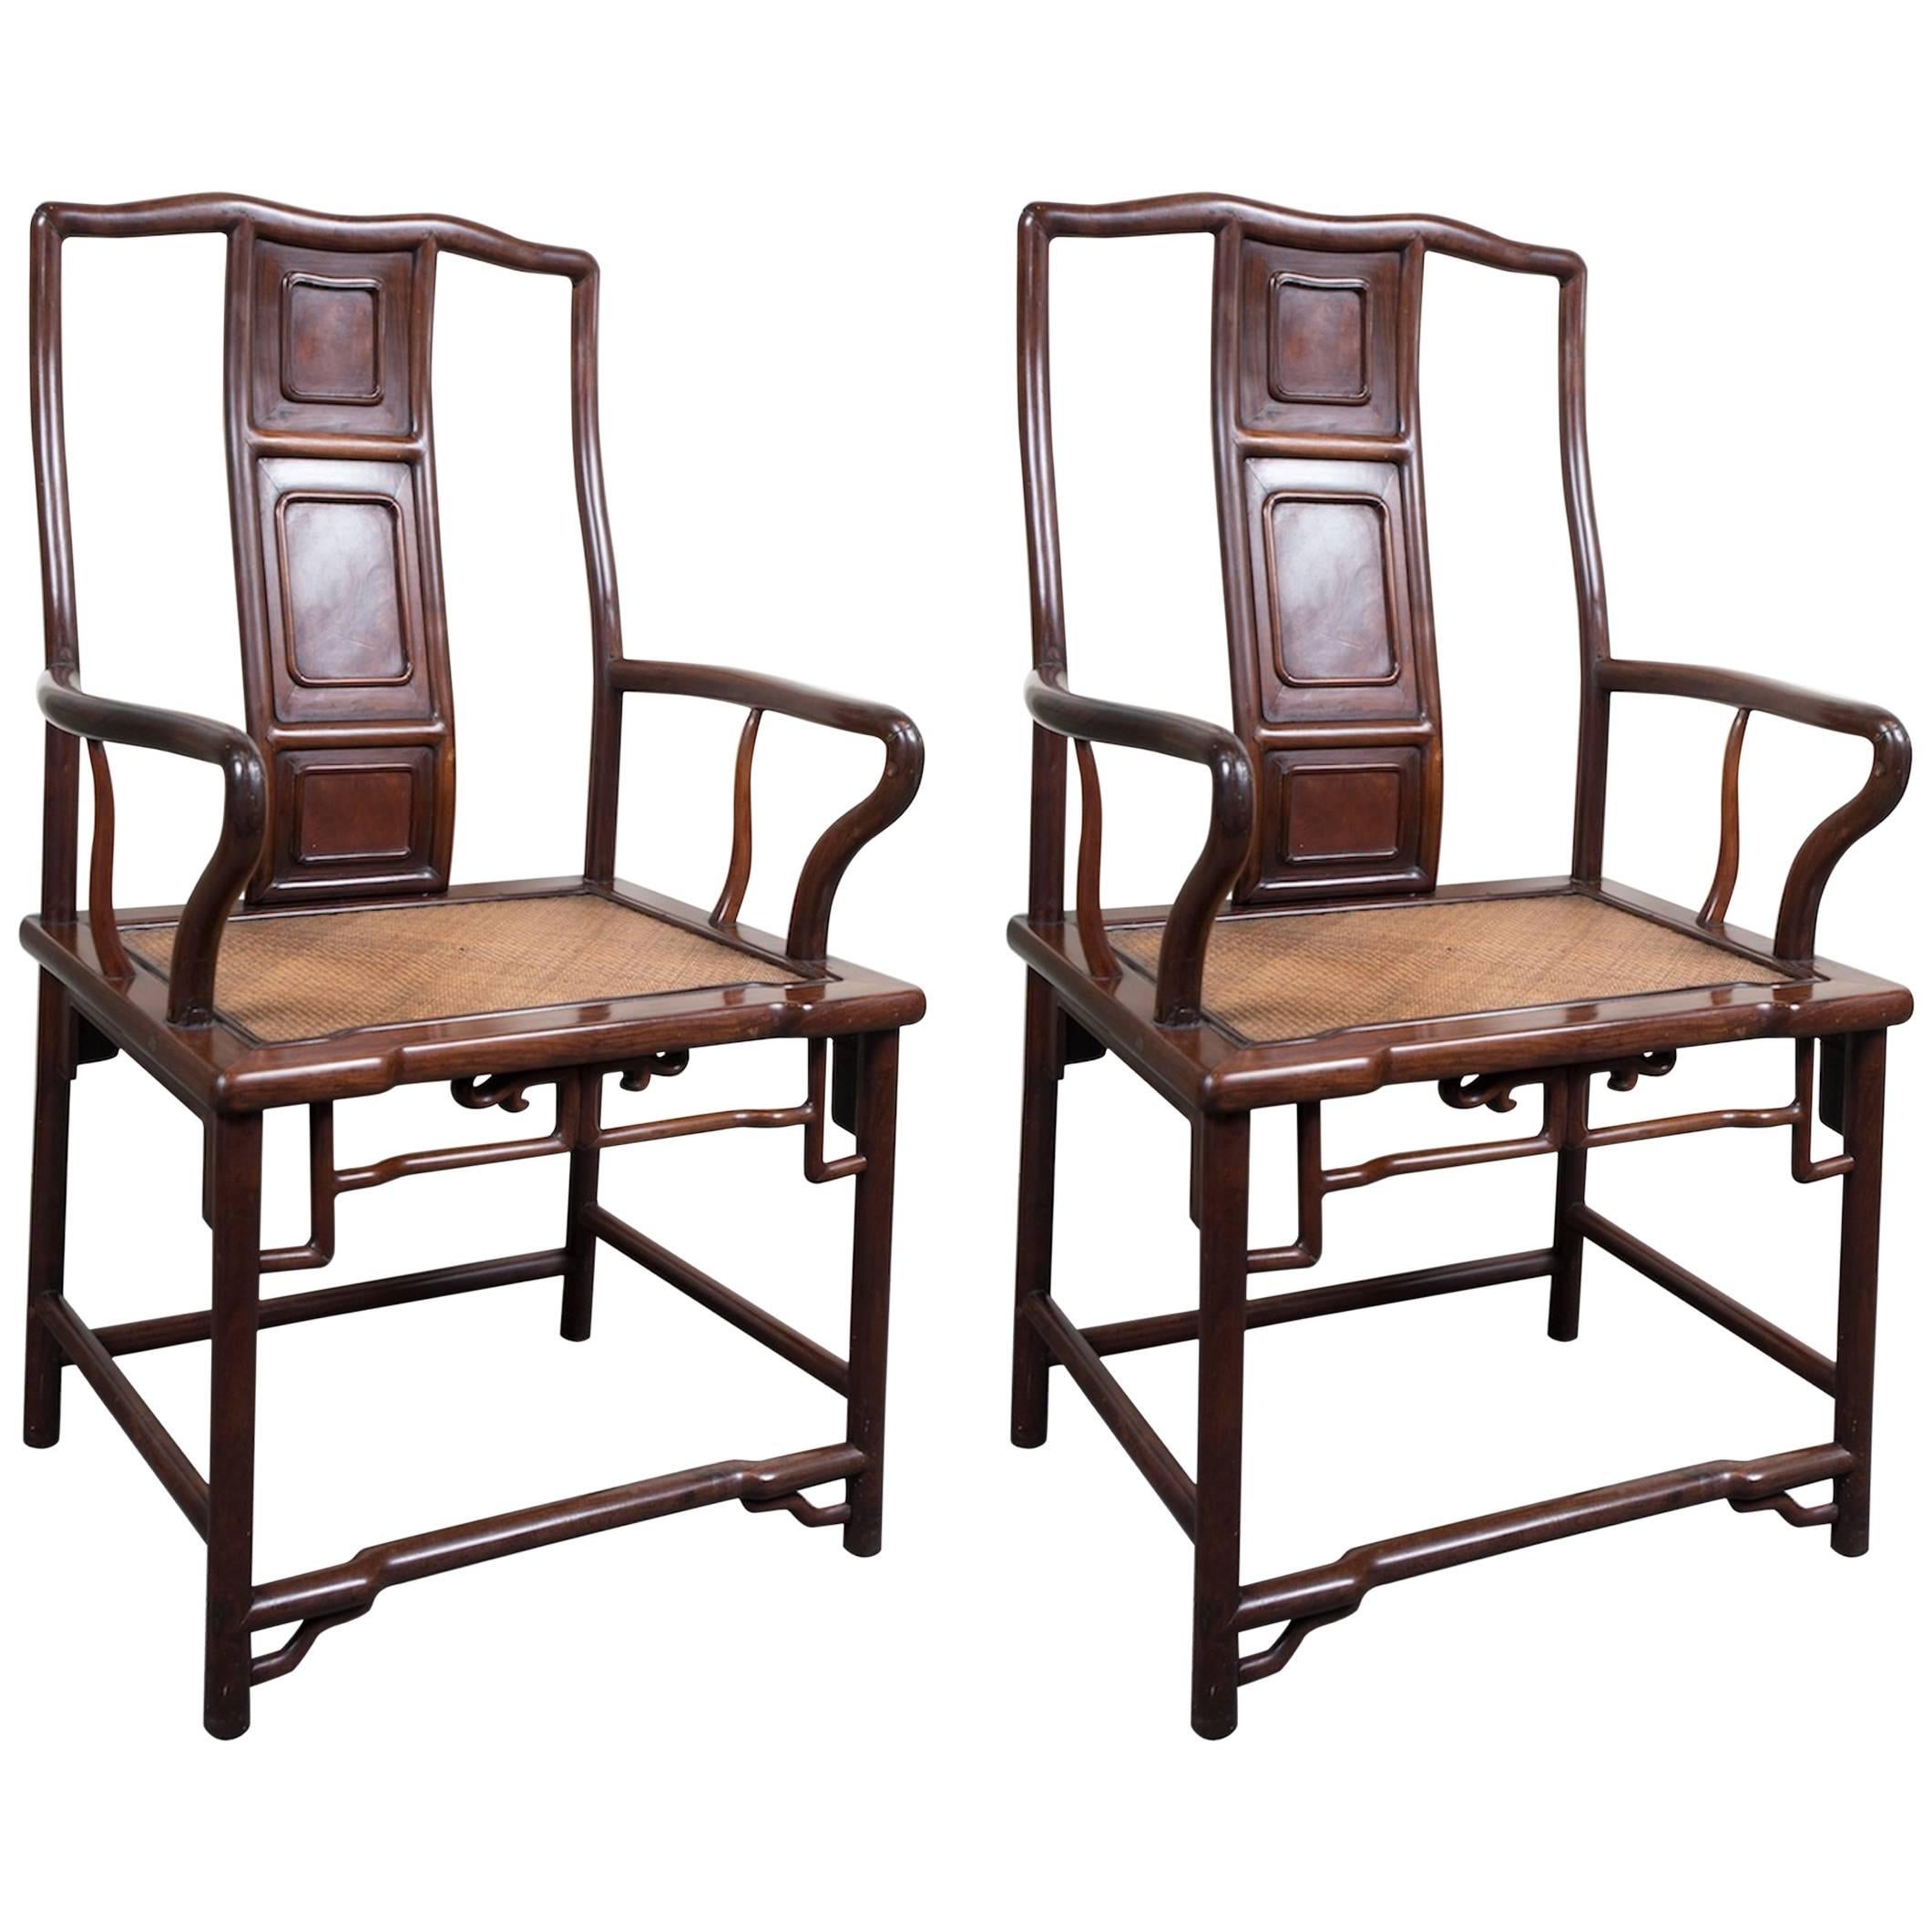 Pair of Quality 19th Chinese Armchairs